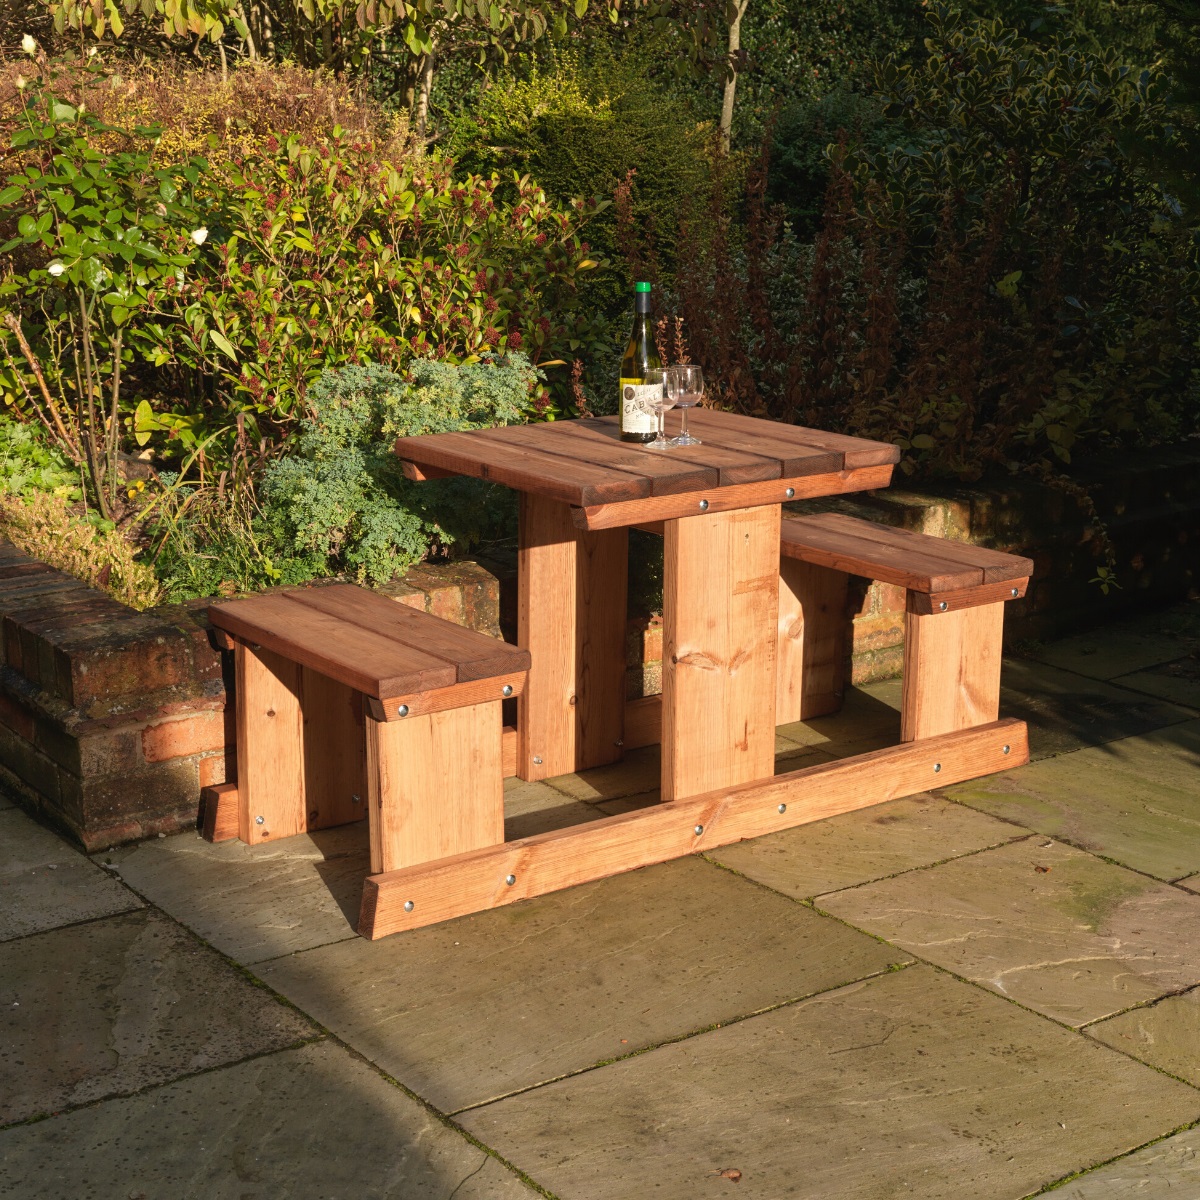 A sturdy wooden picnic table suitable for 2 people with rectangular table and two fixed benches